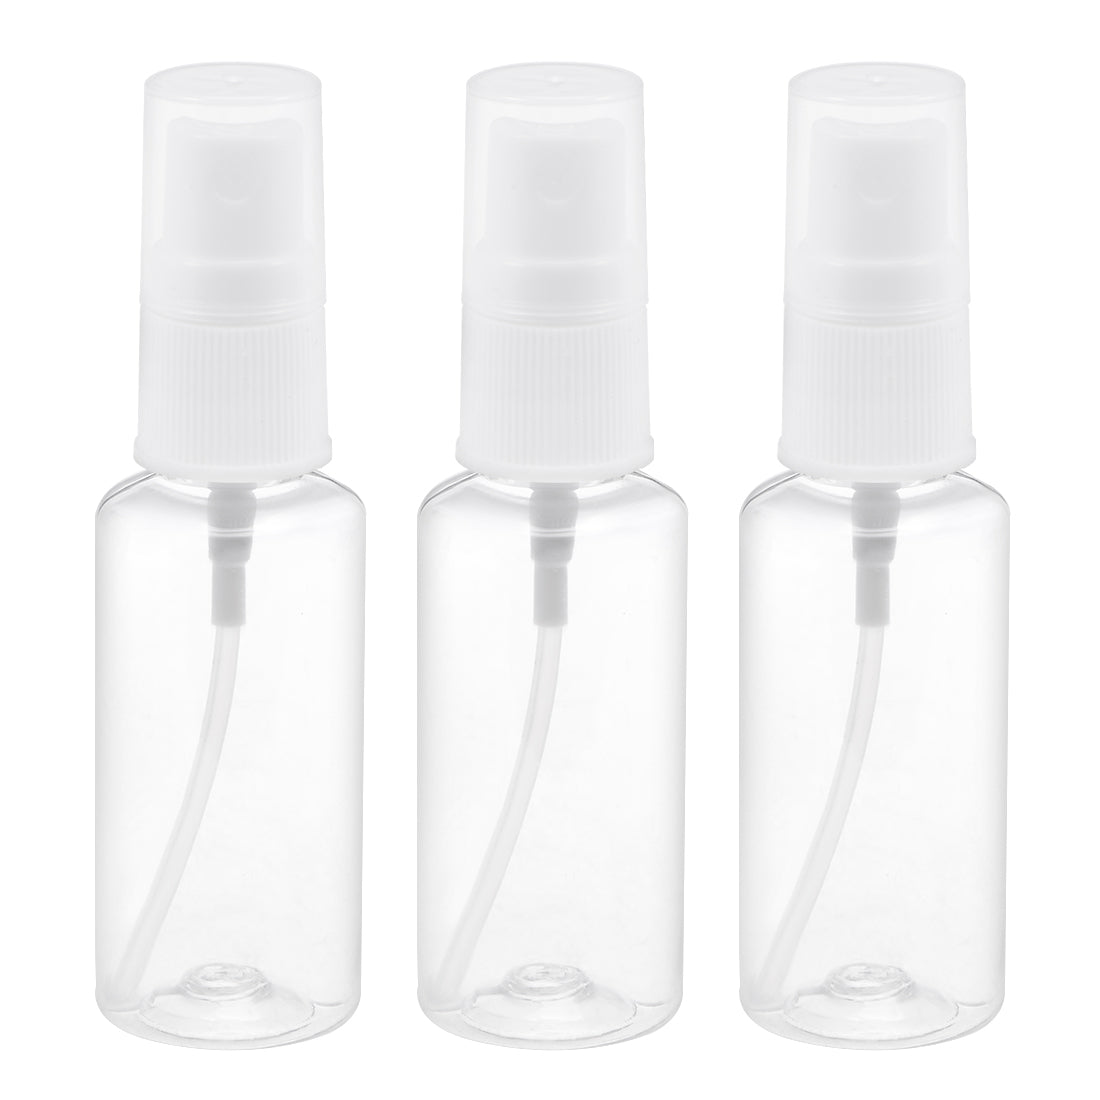 uxcell Uxcell Fine Mist Spray Bottle, 1 oz/ 30ml Plastic Spray Clear Bottles w Atomizer Pump and Refillable 3pcs